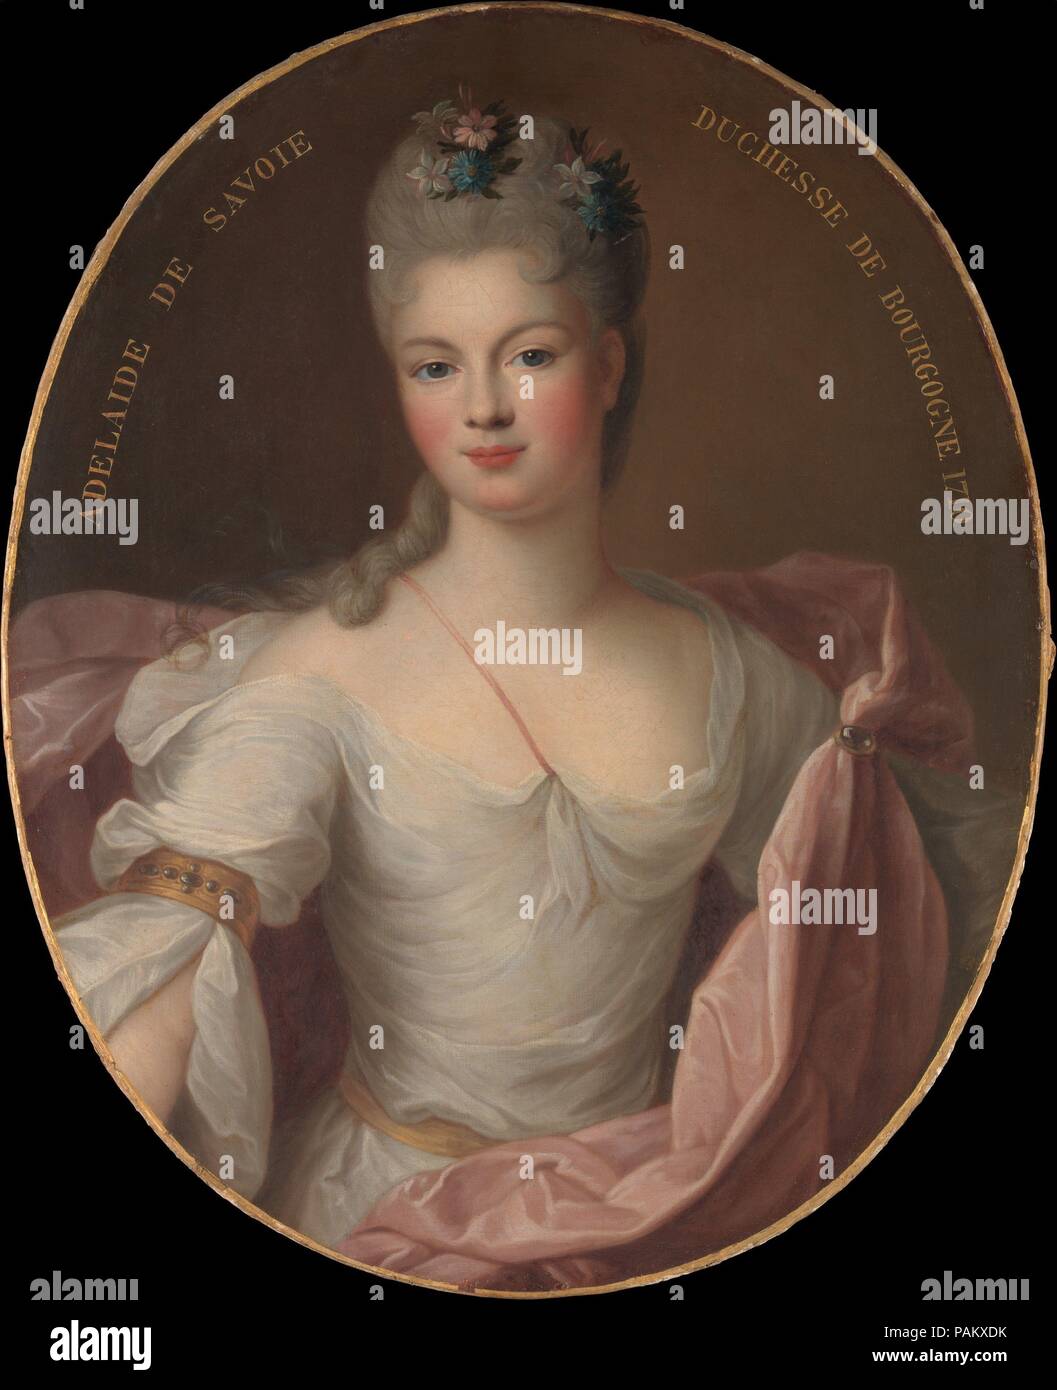 Marie Adélaïde de Savoie (1685-1712), Duchesse de Bourgogne. Artist: Pierre Gobert (French, Fontainebleau 1662-1744 Paris). Dimensions: Oval, 28 3/4 x 23 1/4 in. (73 x 59.1 cm). Date: 1710.  Gobert was accepted as a full member of the Académie Royale de Peinture et de Sculpture in 1701 and in 1704 sent portraits of members of the royal family to The Salon. He was favored at the court and Marie Adélaïde, the mother of Louis XV, sat for him on more than one occasion. Museum: Metropolitan Museum of Art, New York, USA. Stock Photo